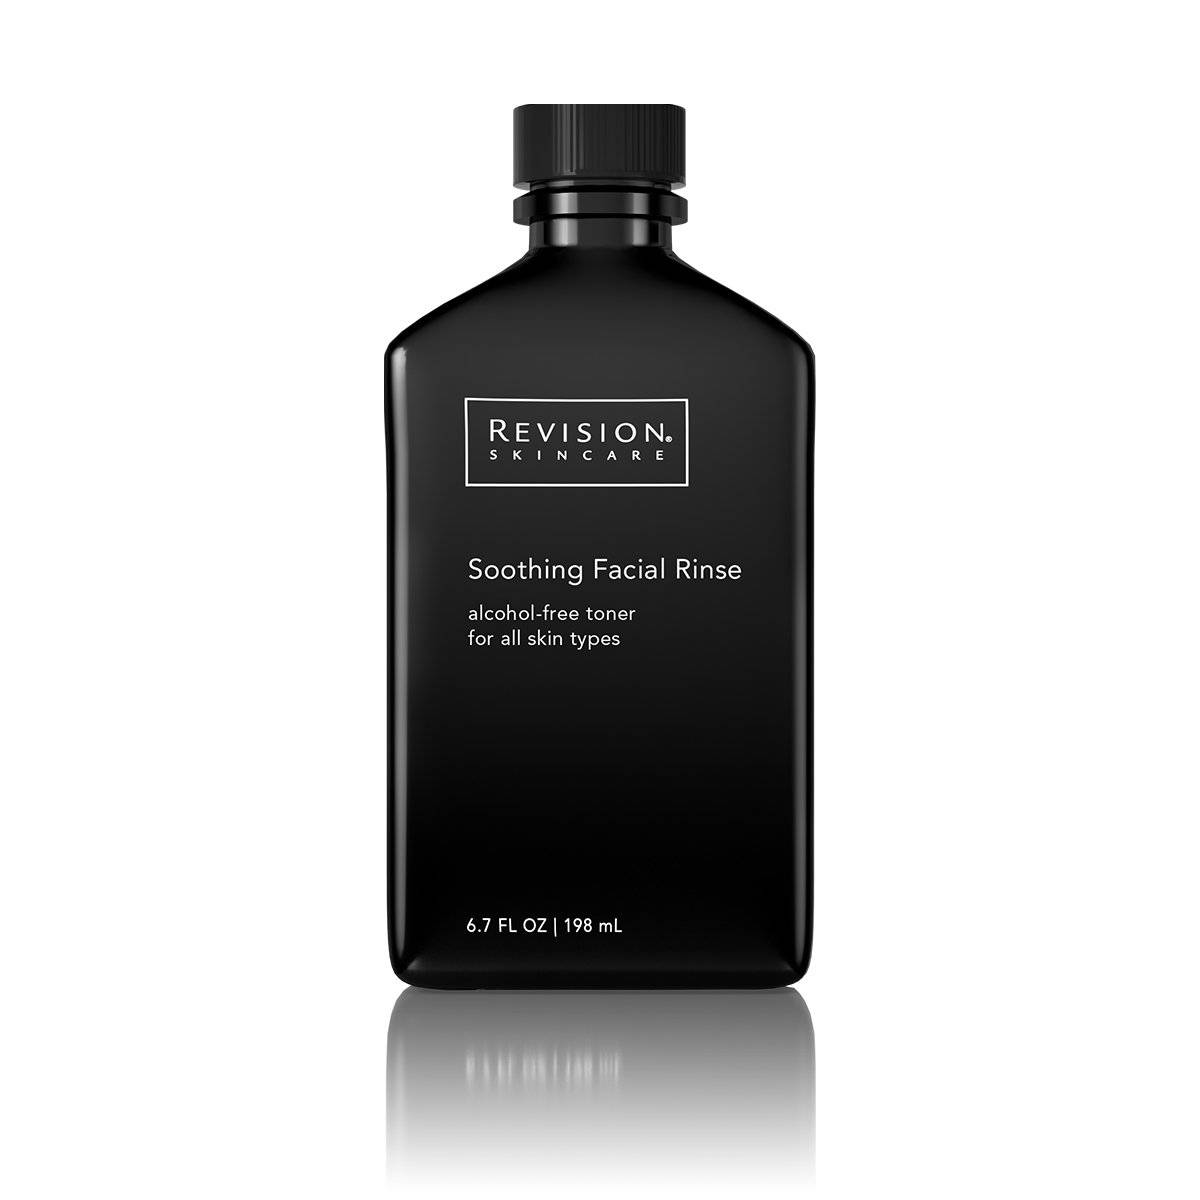 Revision Soothing Facial Rinse - Anti-Aging Skin care